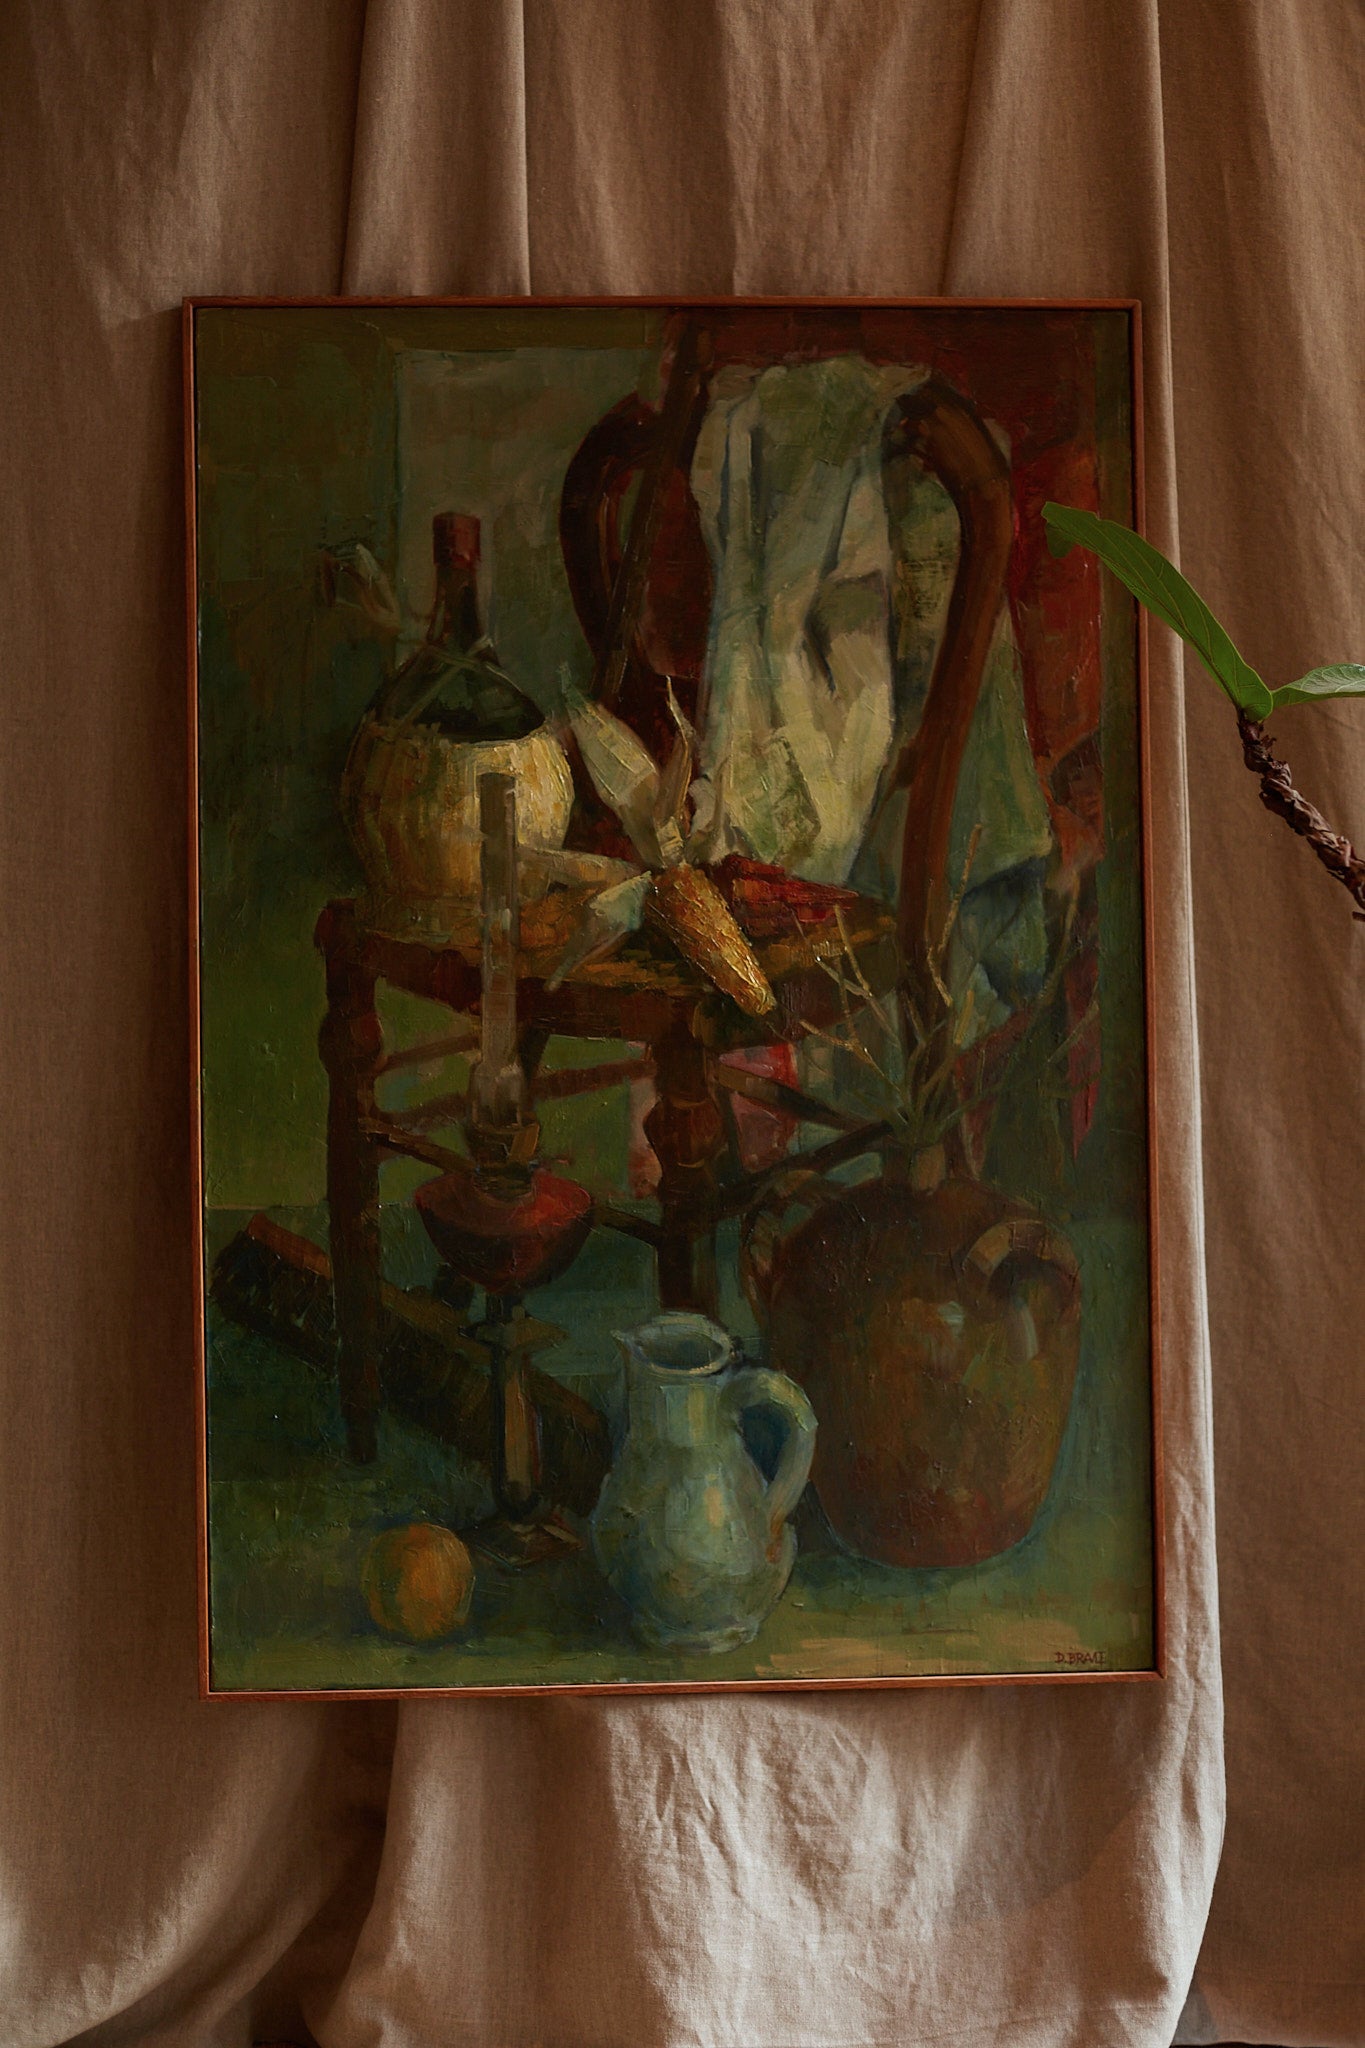 Oil on canvas - Still life with a chair - by Daniel Brault.